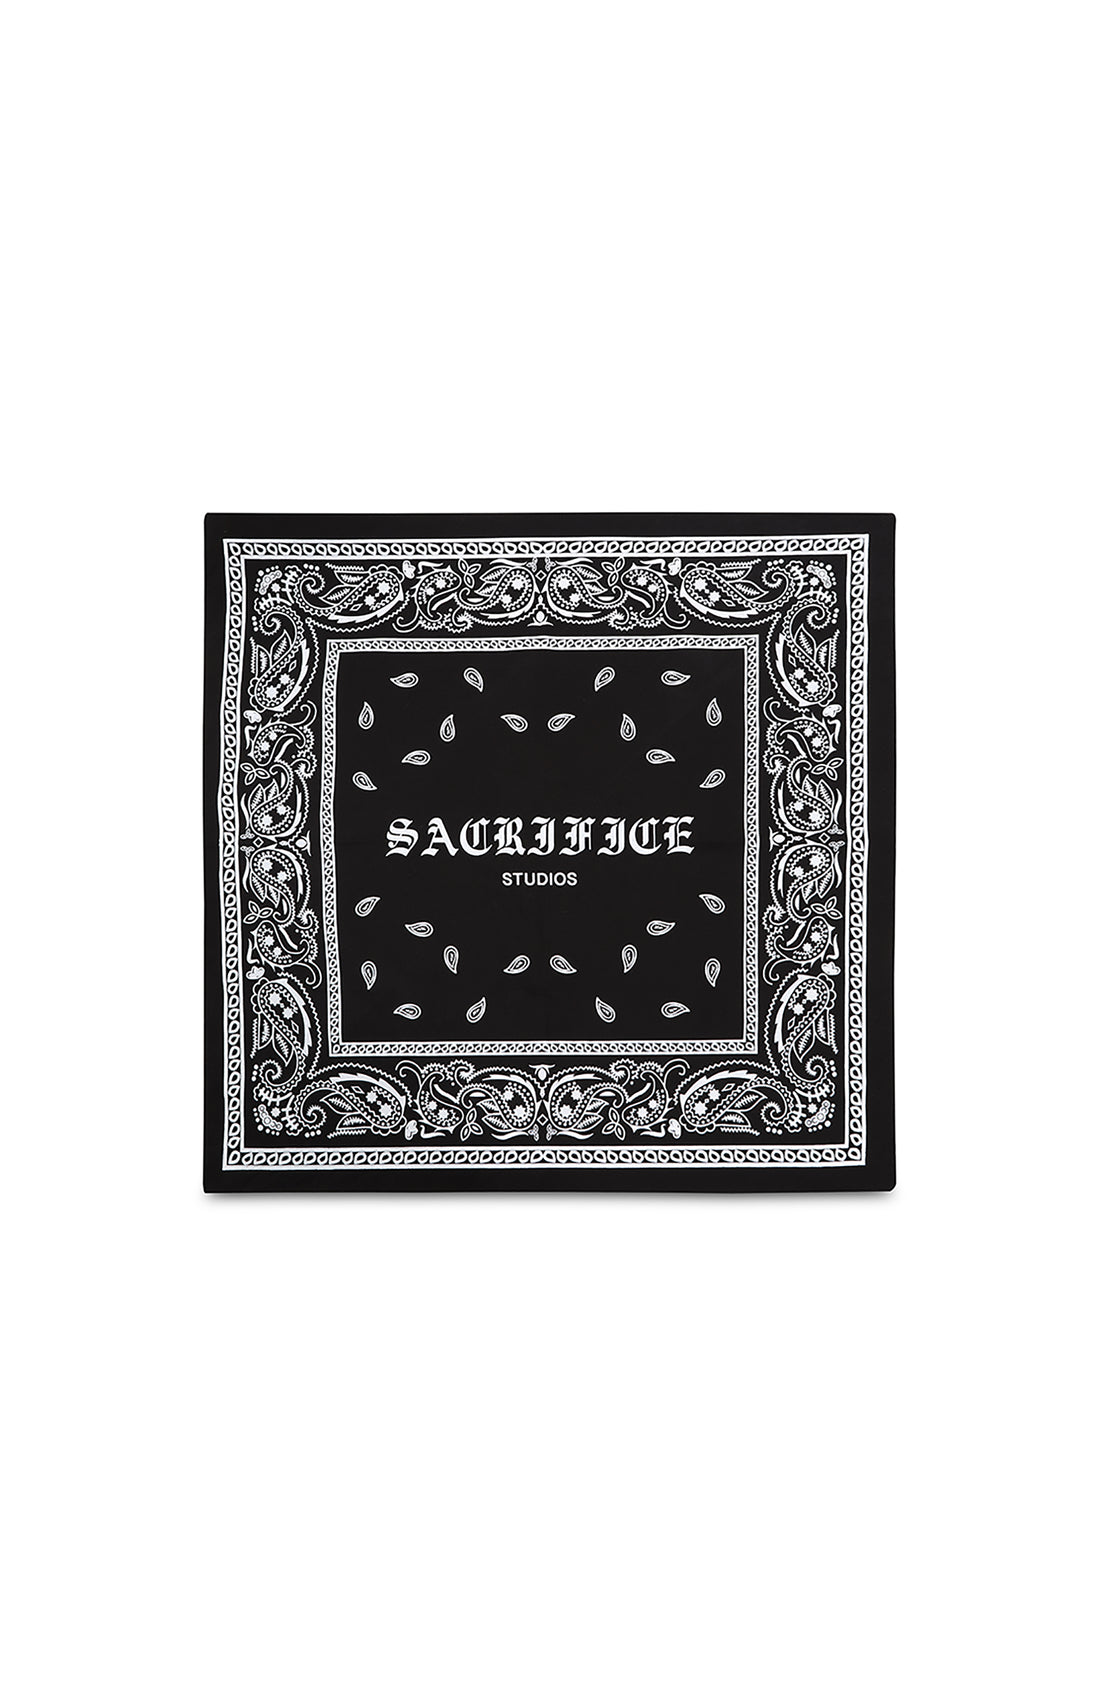 Add a touch of style and edge to your wardrobe with our premium bandana featuring a bold white graphic print. Measuring 55x55cm, this bandana is perfect for a variety of styling options. Expertly crafted in Portugal with a focus on quality and durability, it is easy to maintain with machine washing and hanging to dry for best results. Make a statement with this unique and eye-catching accessory.